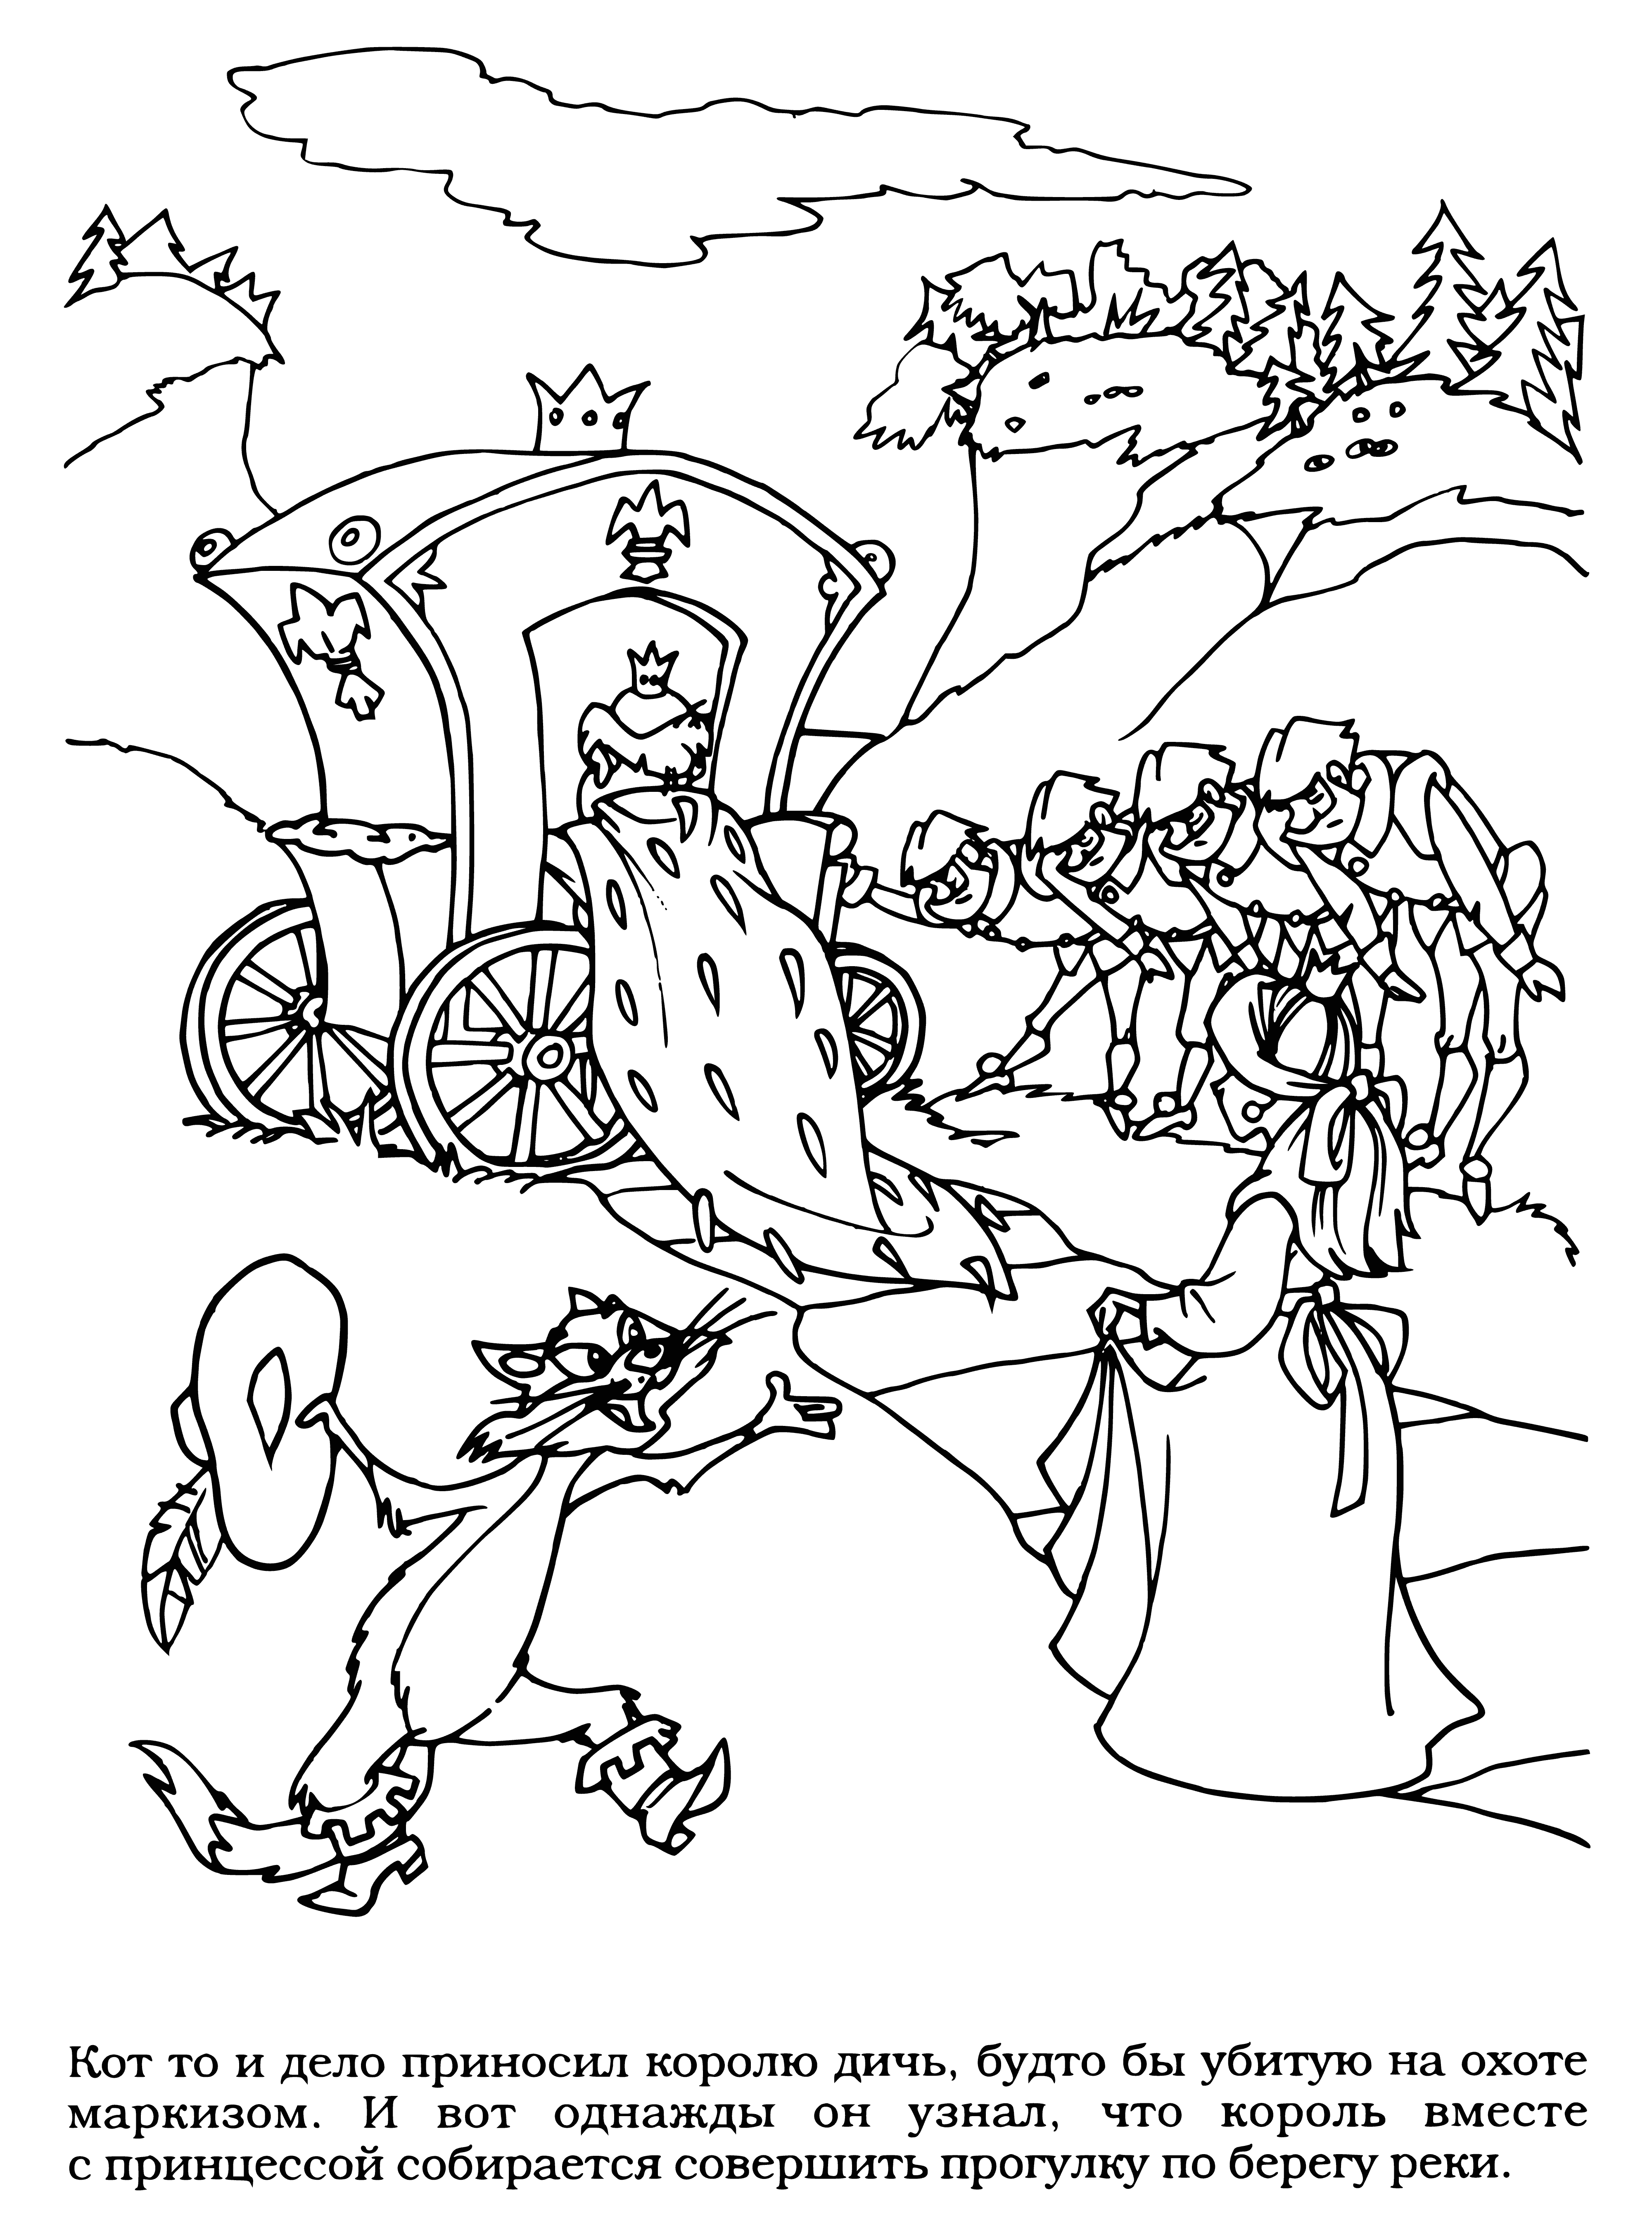 The king goes for a walk coloring page